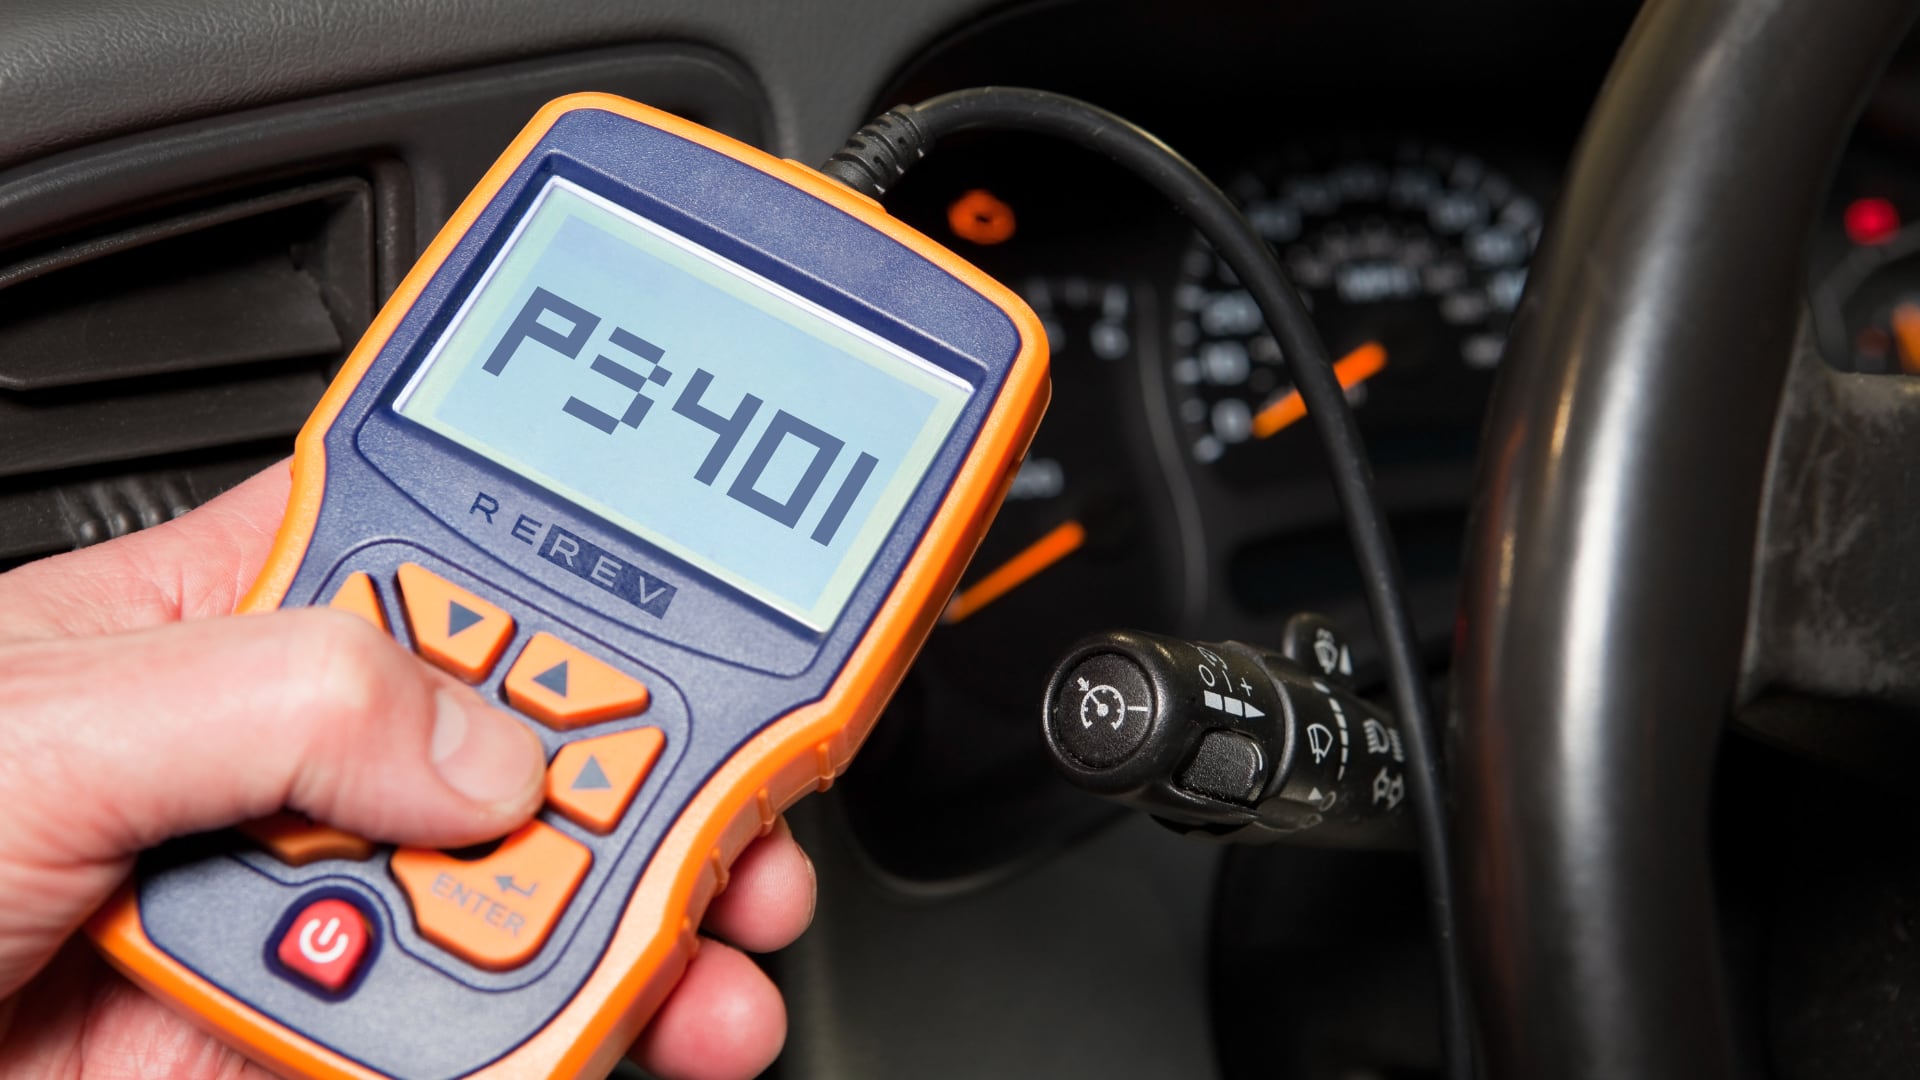 A person holding a car diagnostic tool in their hand.